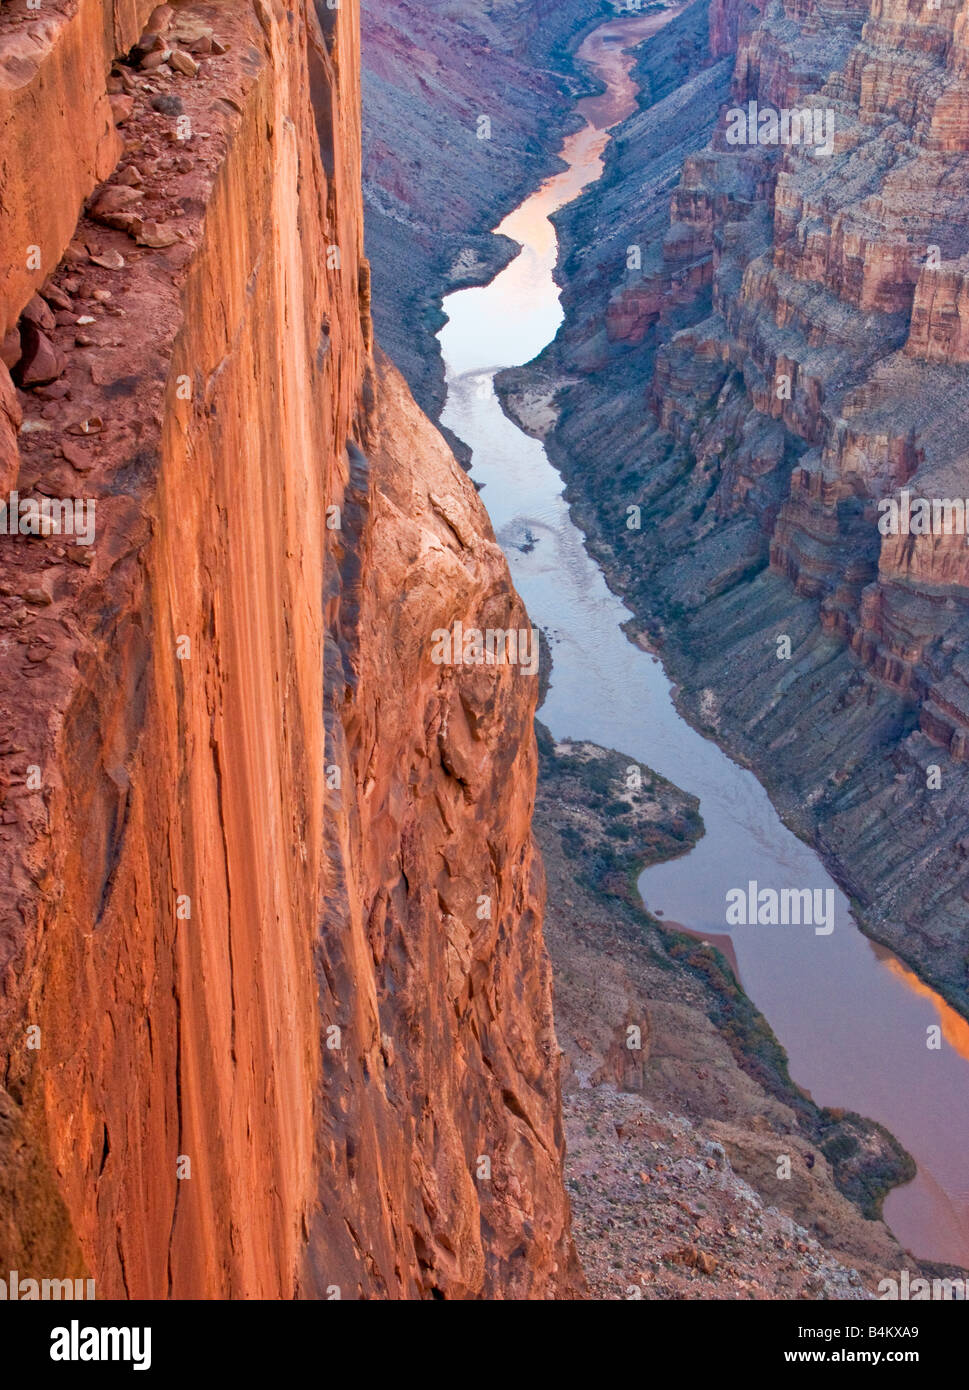 Toroweap Overlook In Grand Canyon National Park Stock Photo Alamy